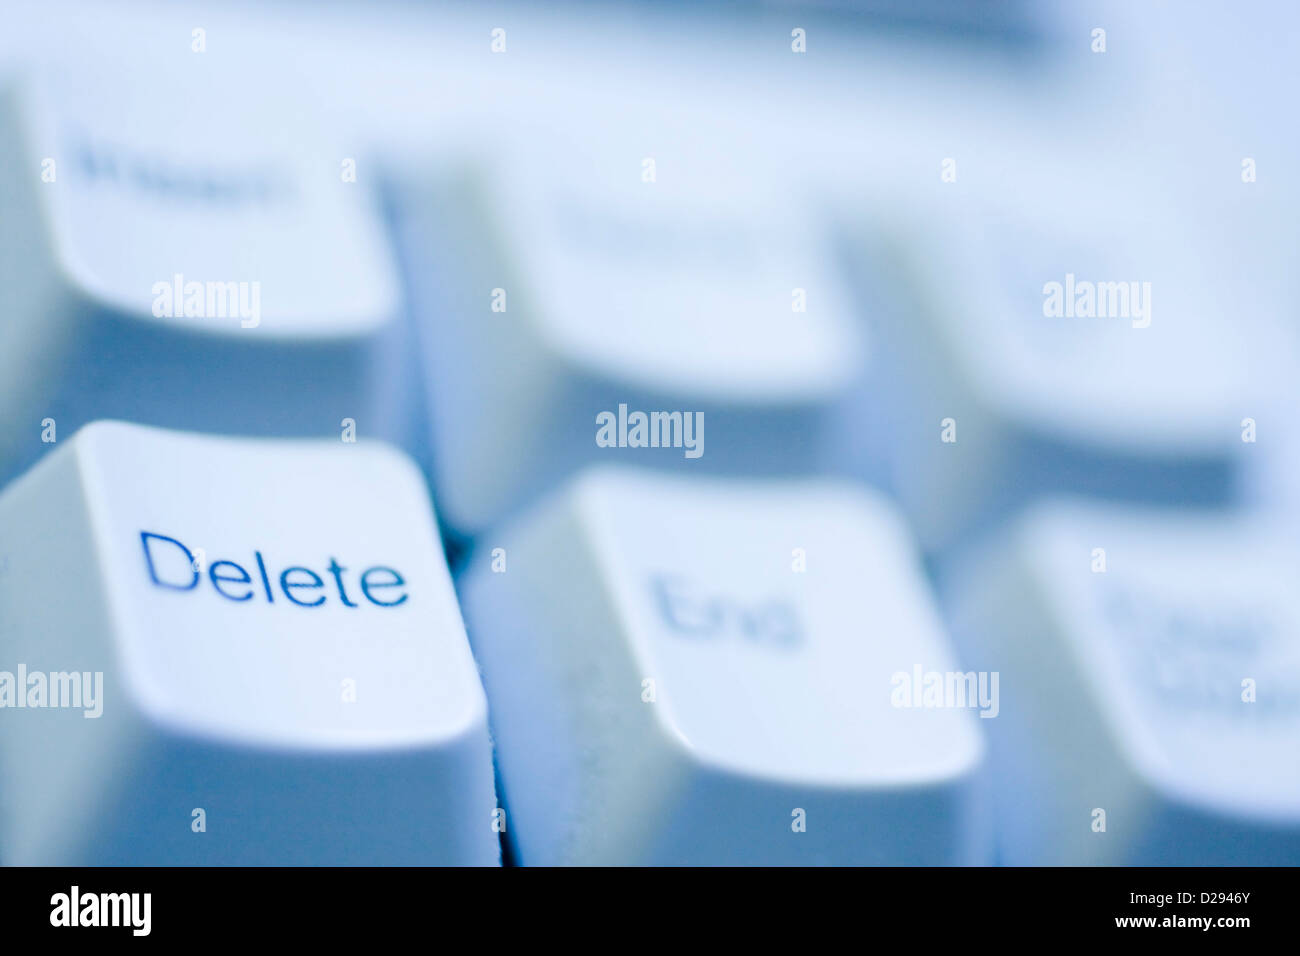 computers keyboard in blue color Stock Photo